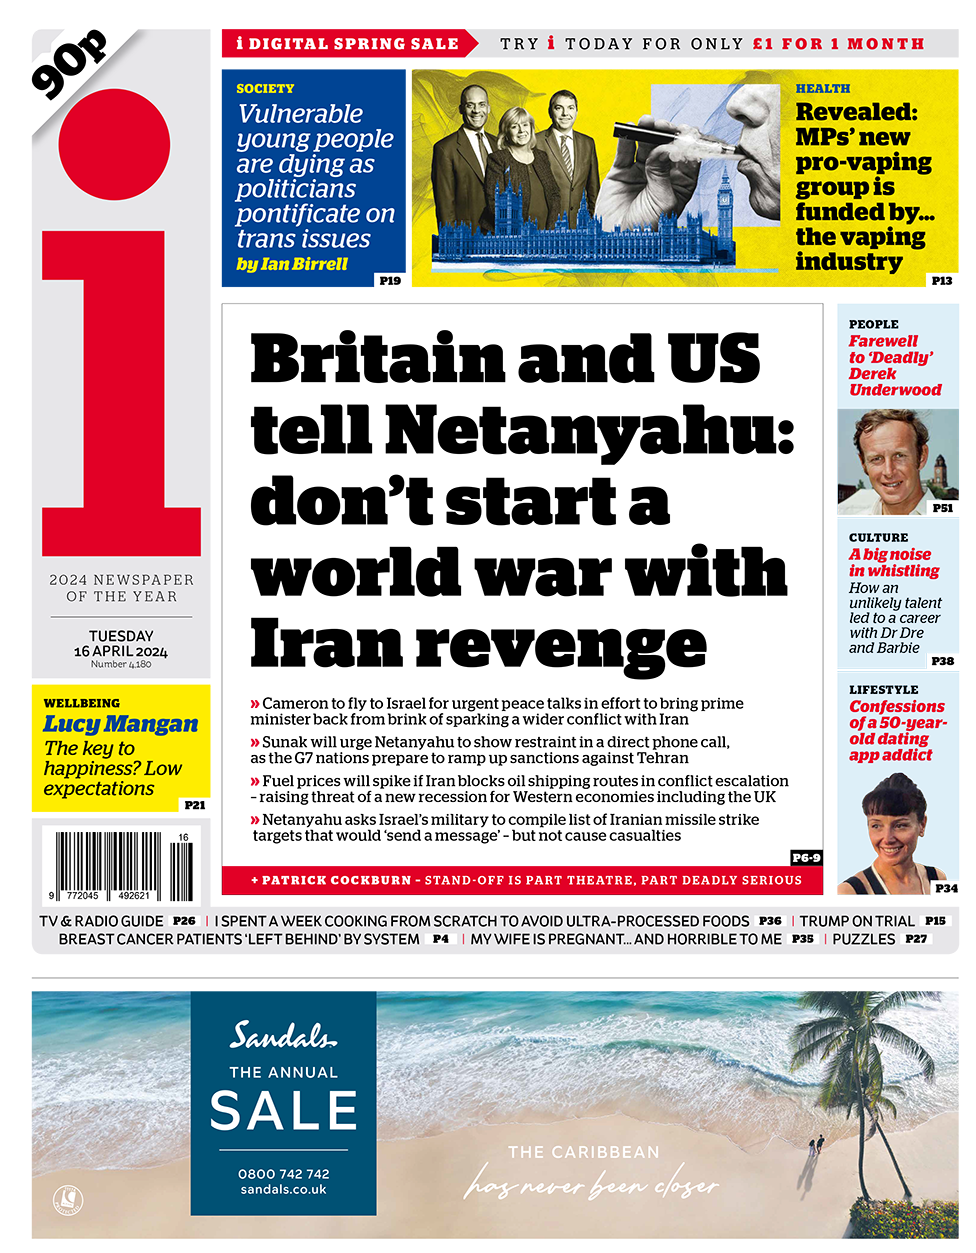 The headline in the i reads: "Britain and US tell Netanyahu: don't start a world war with Iran revenge".